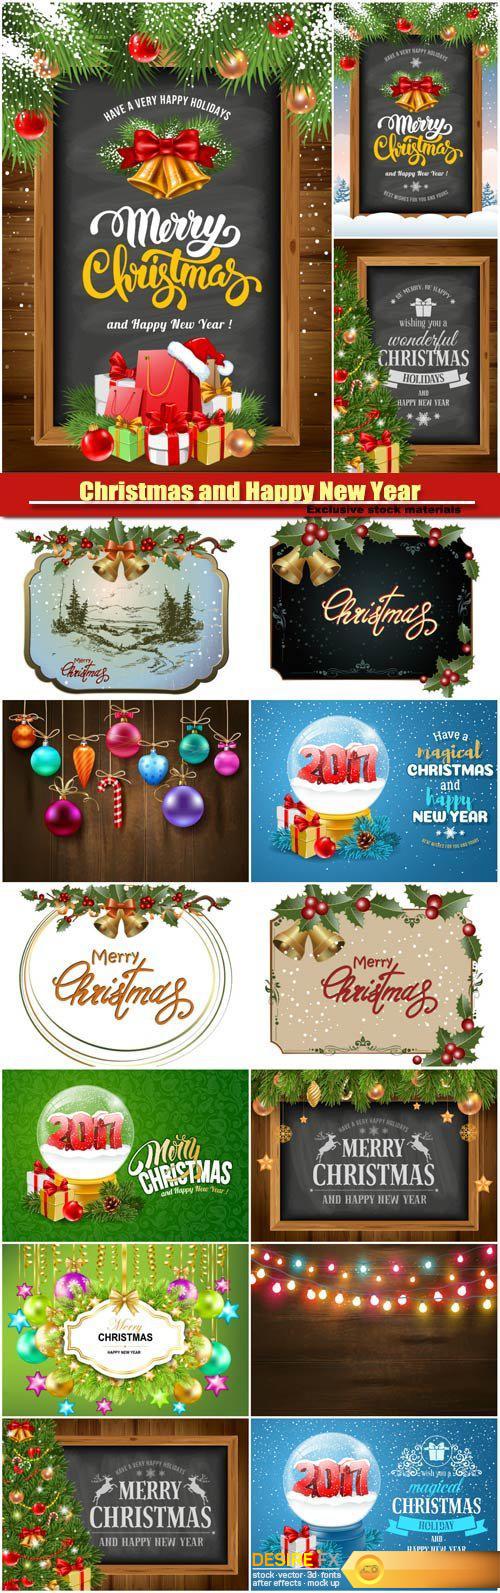 Christmas and Happy New Year, decorative elements, frame with Christmas decorations